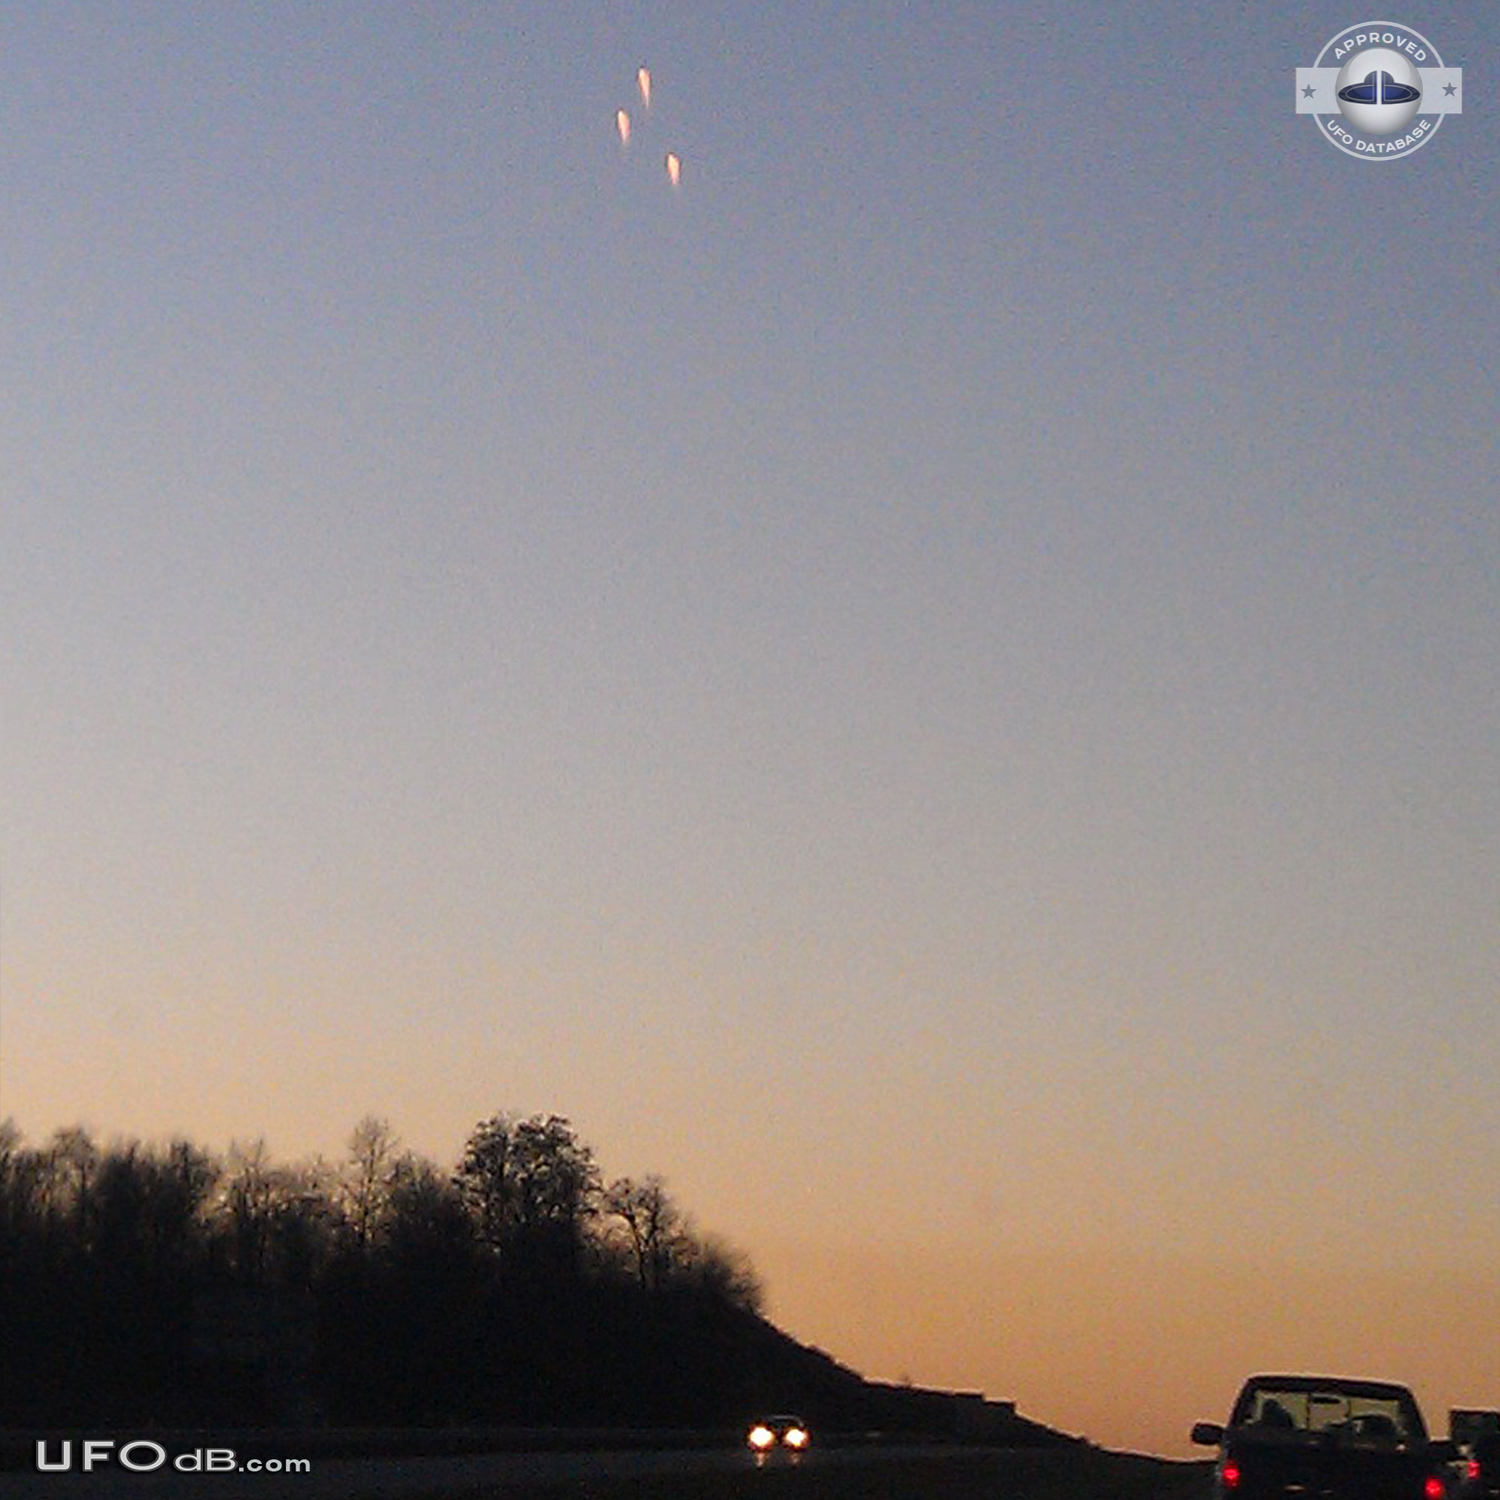 UFO orbs in Triangle formation over Nuclear plant in Pennsylvania 2012 UFO Picture #528-3